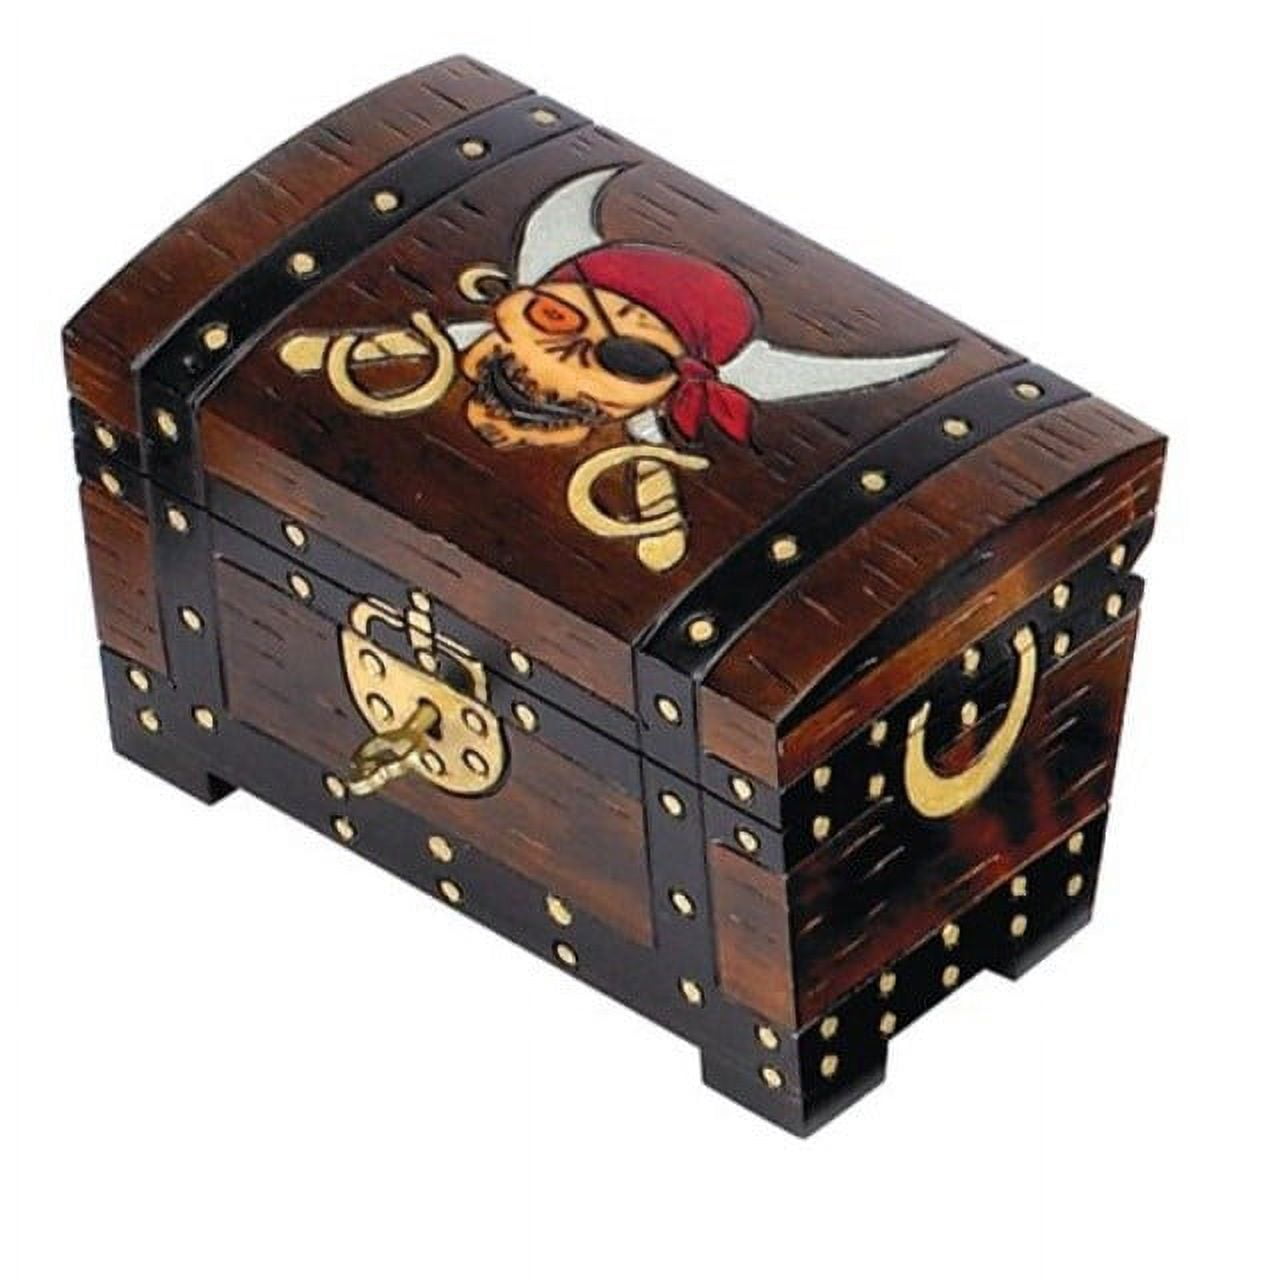 Small Pirate Style Wooden Treasure Chest - Chest with Padlock